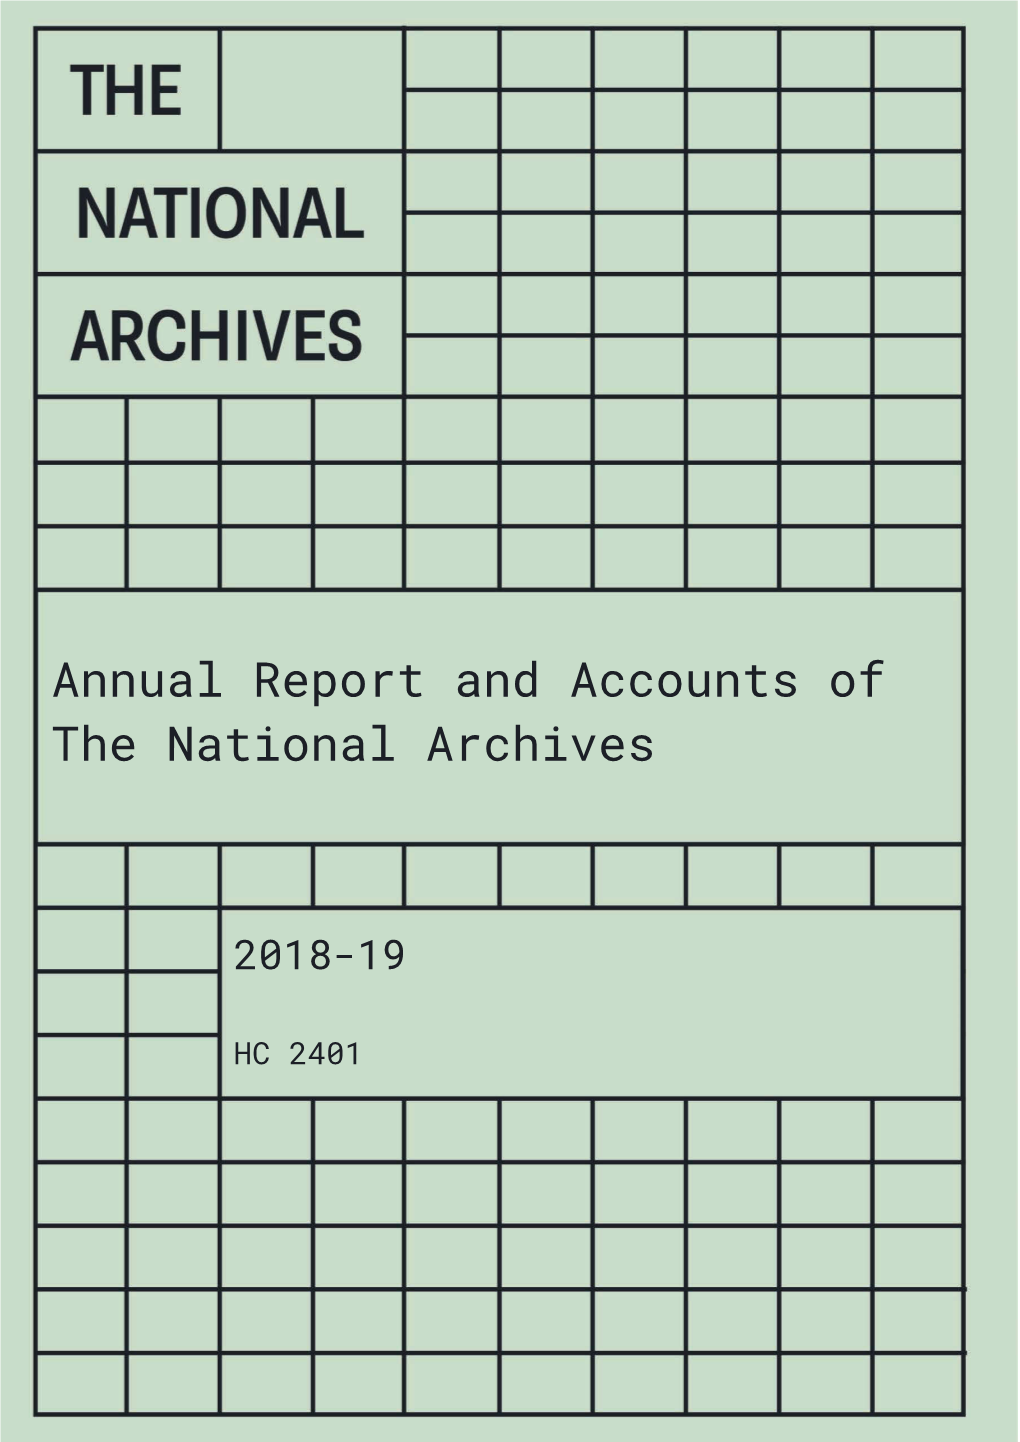 Download the Annual Report and Accounts 2018-19